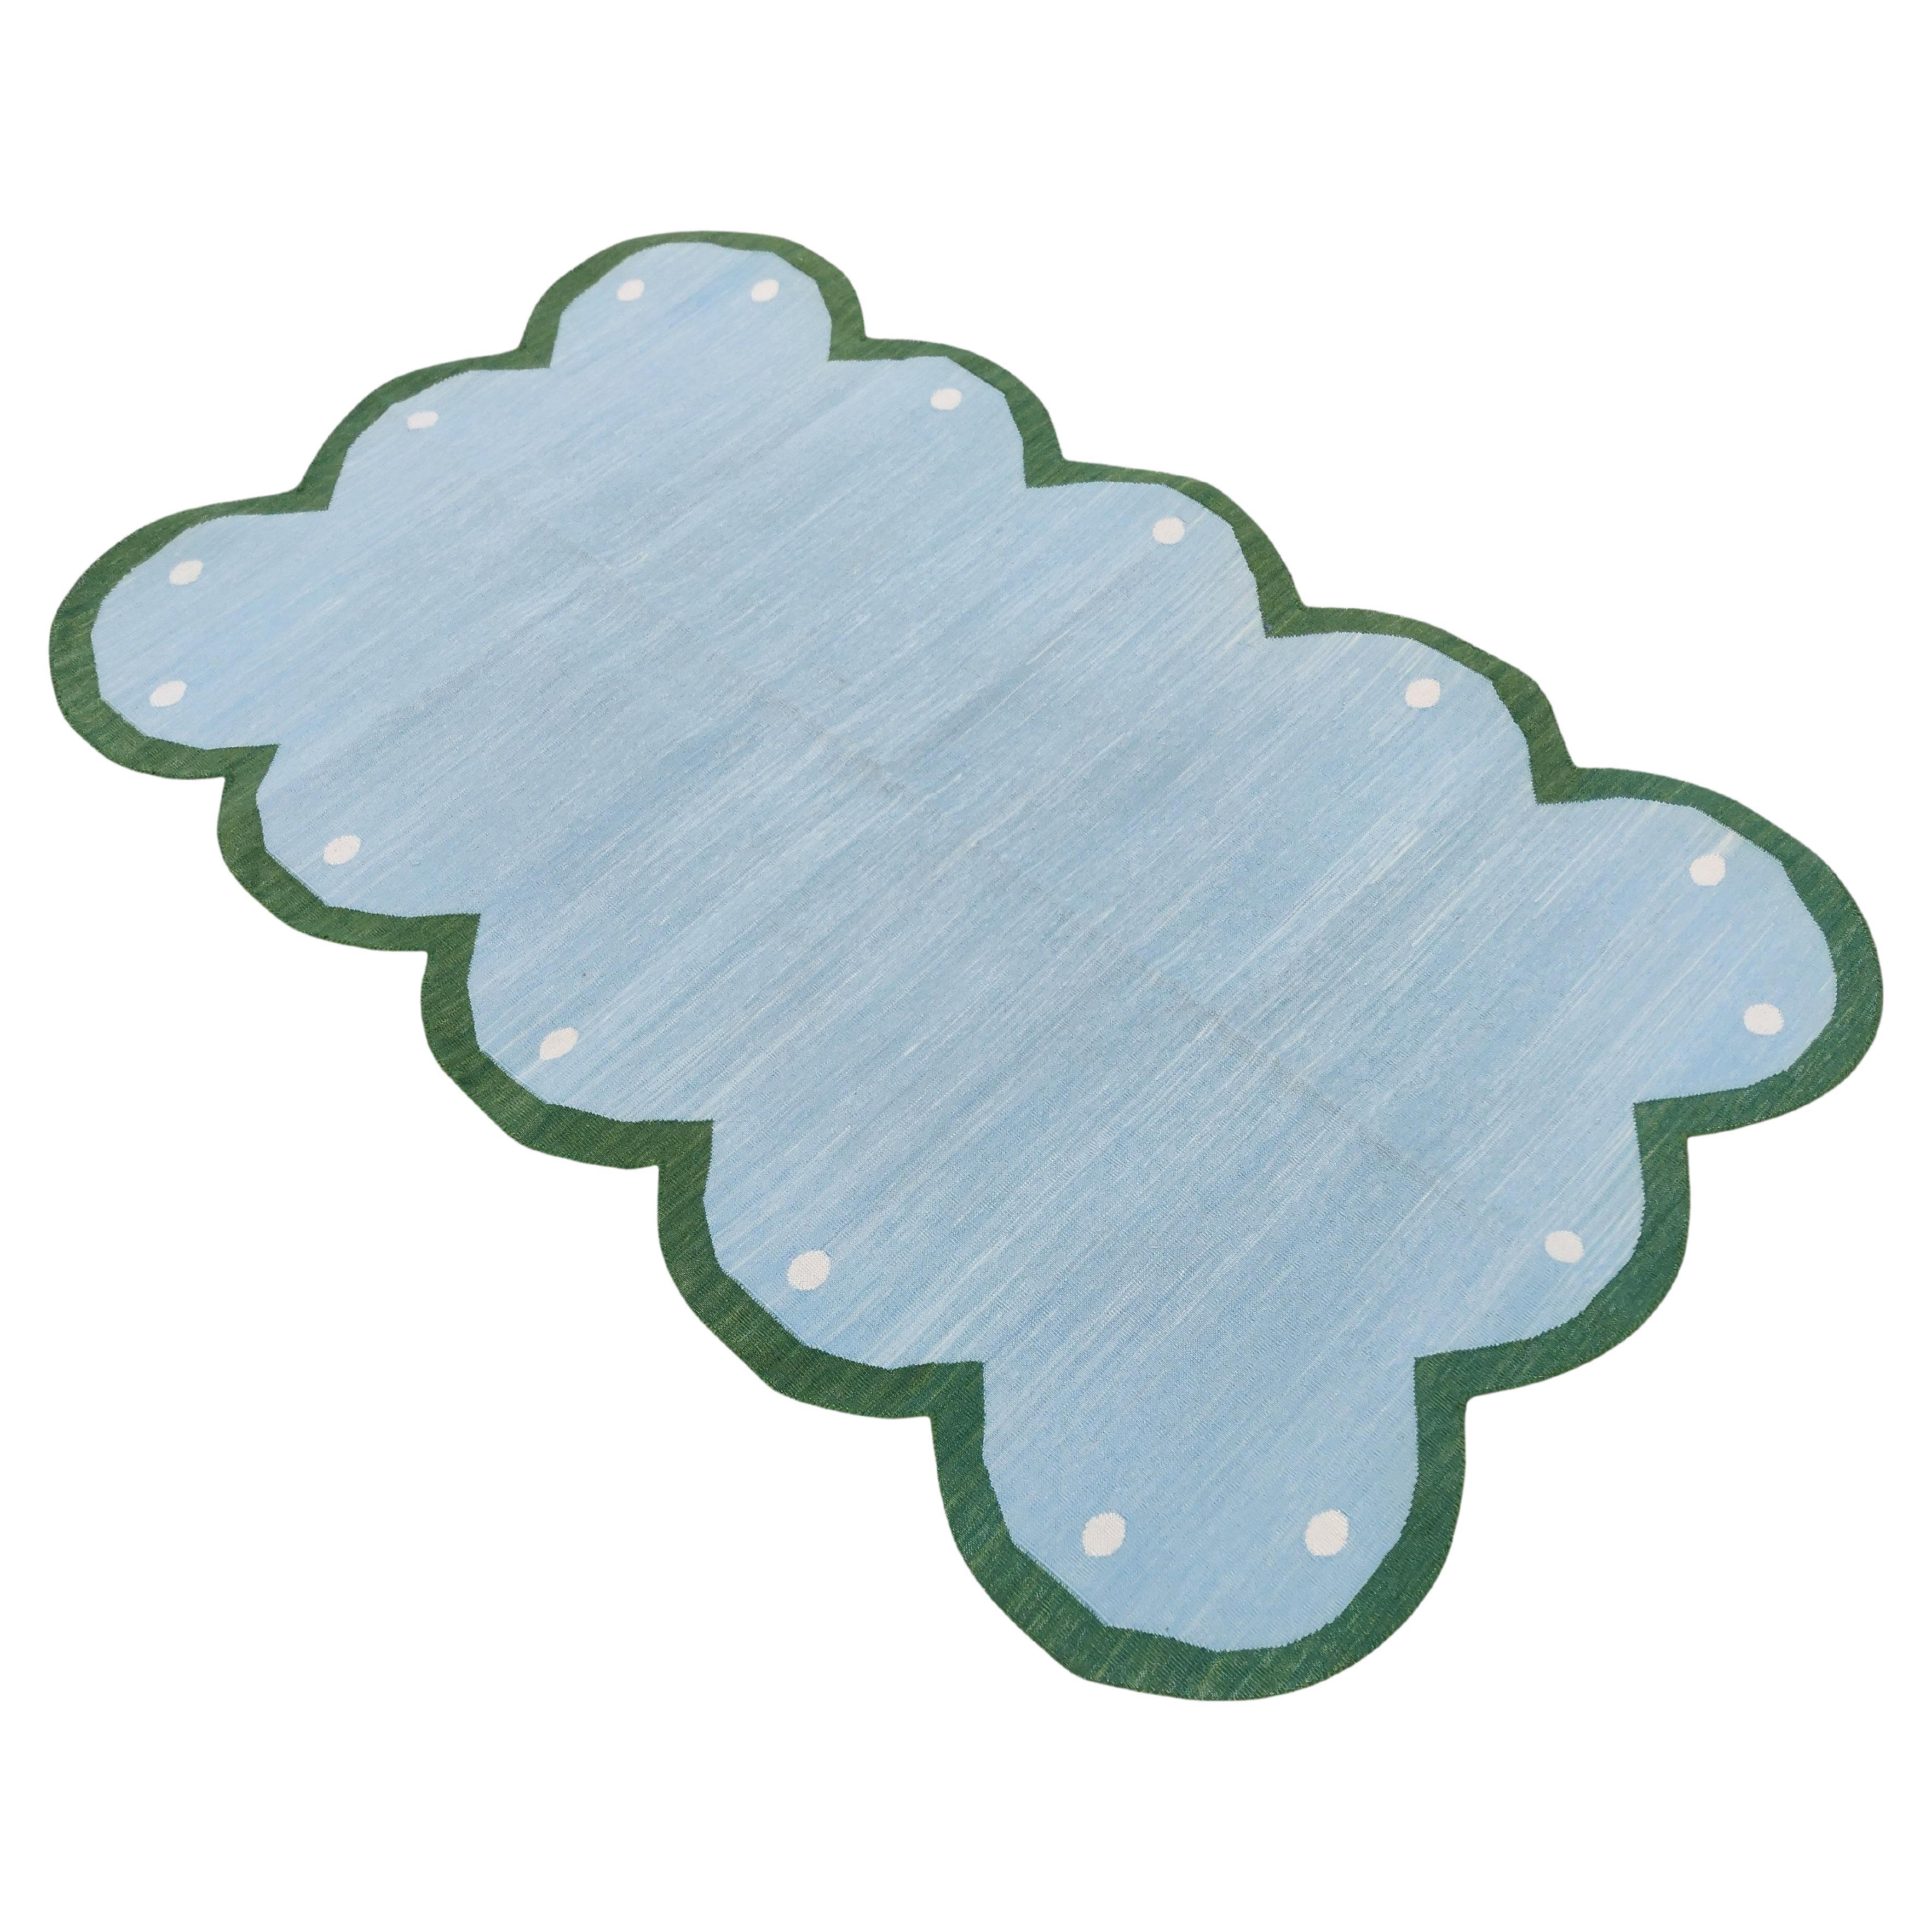 Handmade Cotton Area Flat Weave Rug, Sky Blue And Green Scalloped Indian Dhurrie